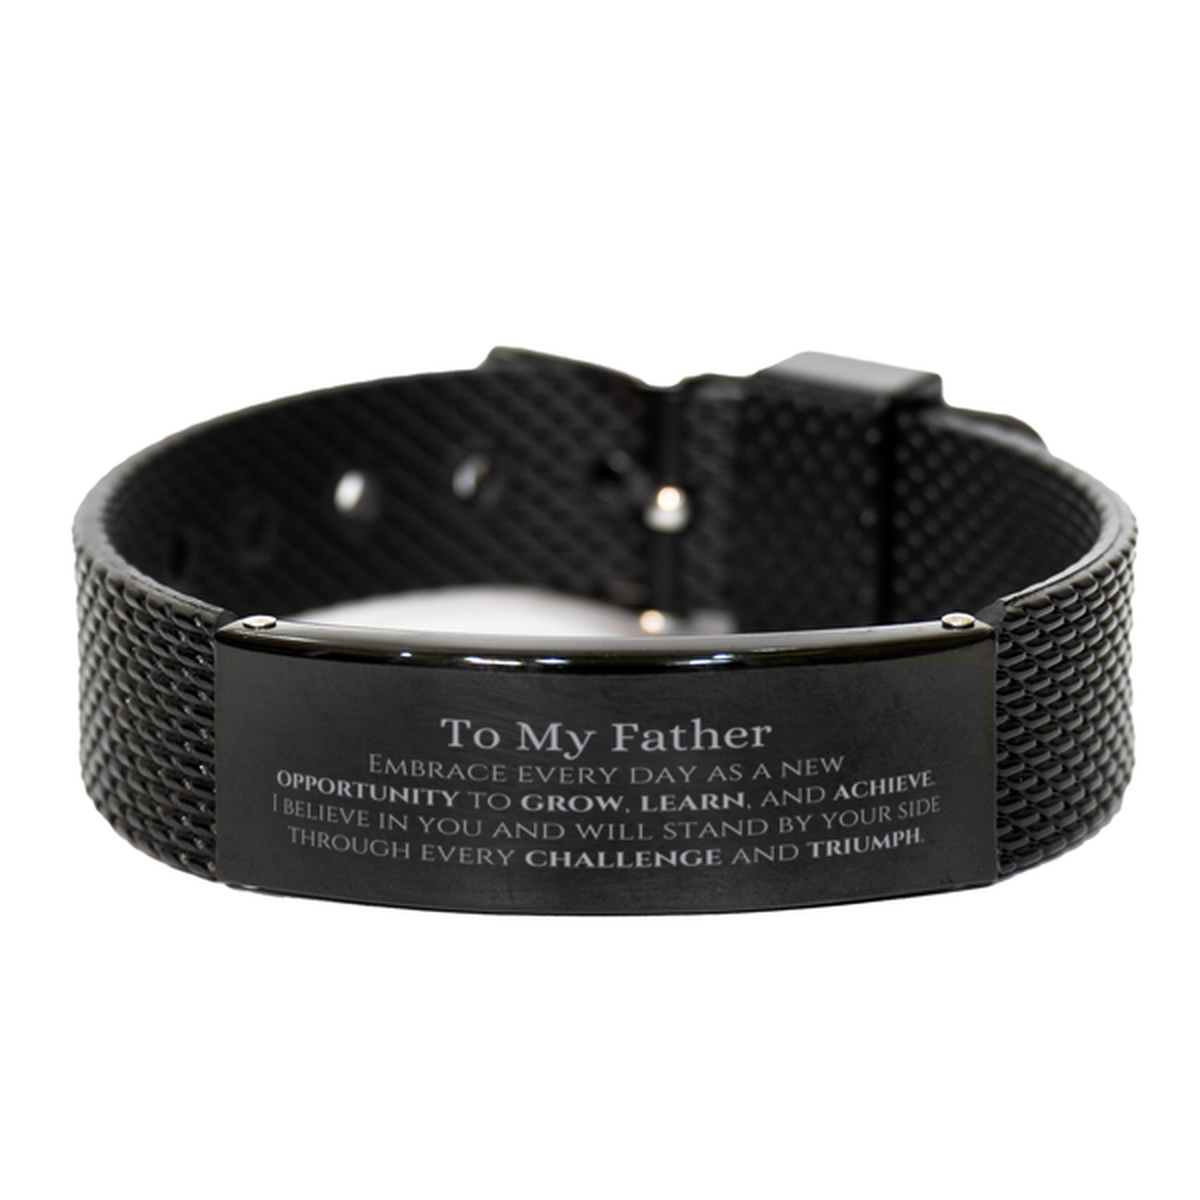 To My Father Gifts, I believe in you and will stand by your side, Inspirational Black Shark Mesh Bracelet For Father, Birthday Christmas Motivational Father Gifts